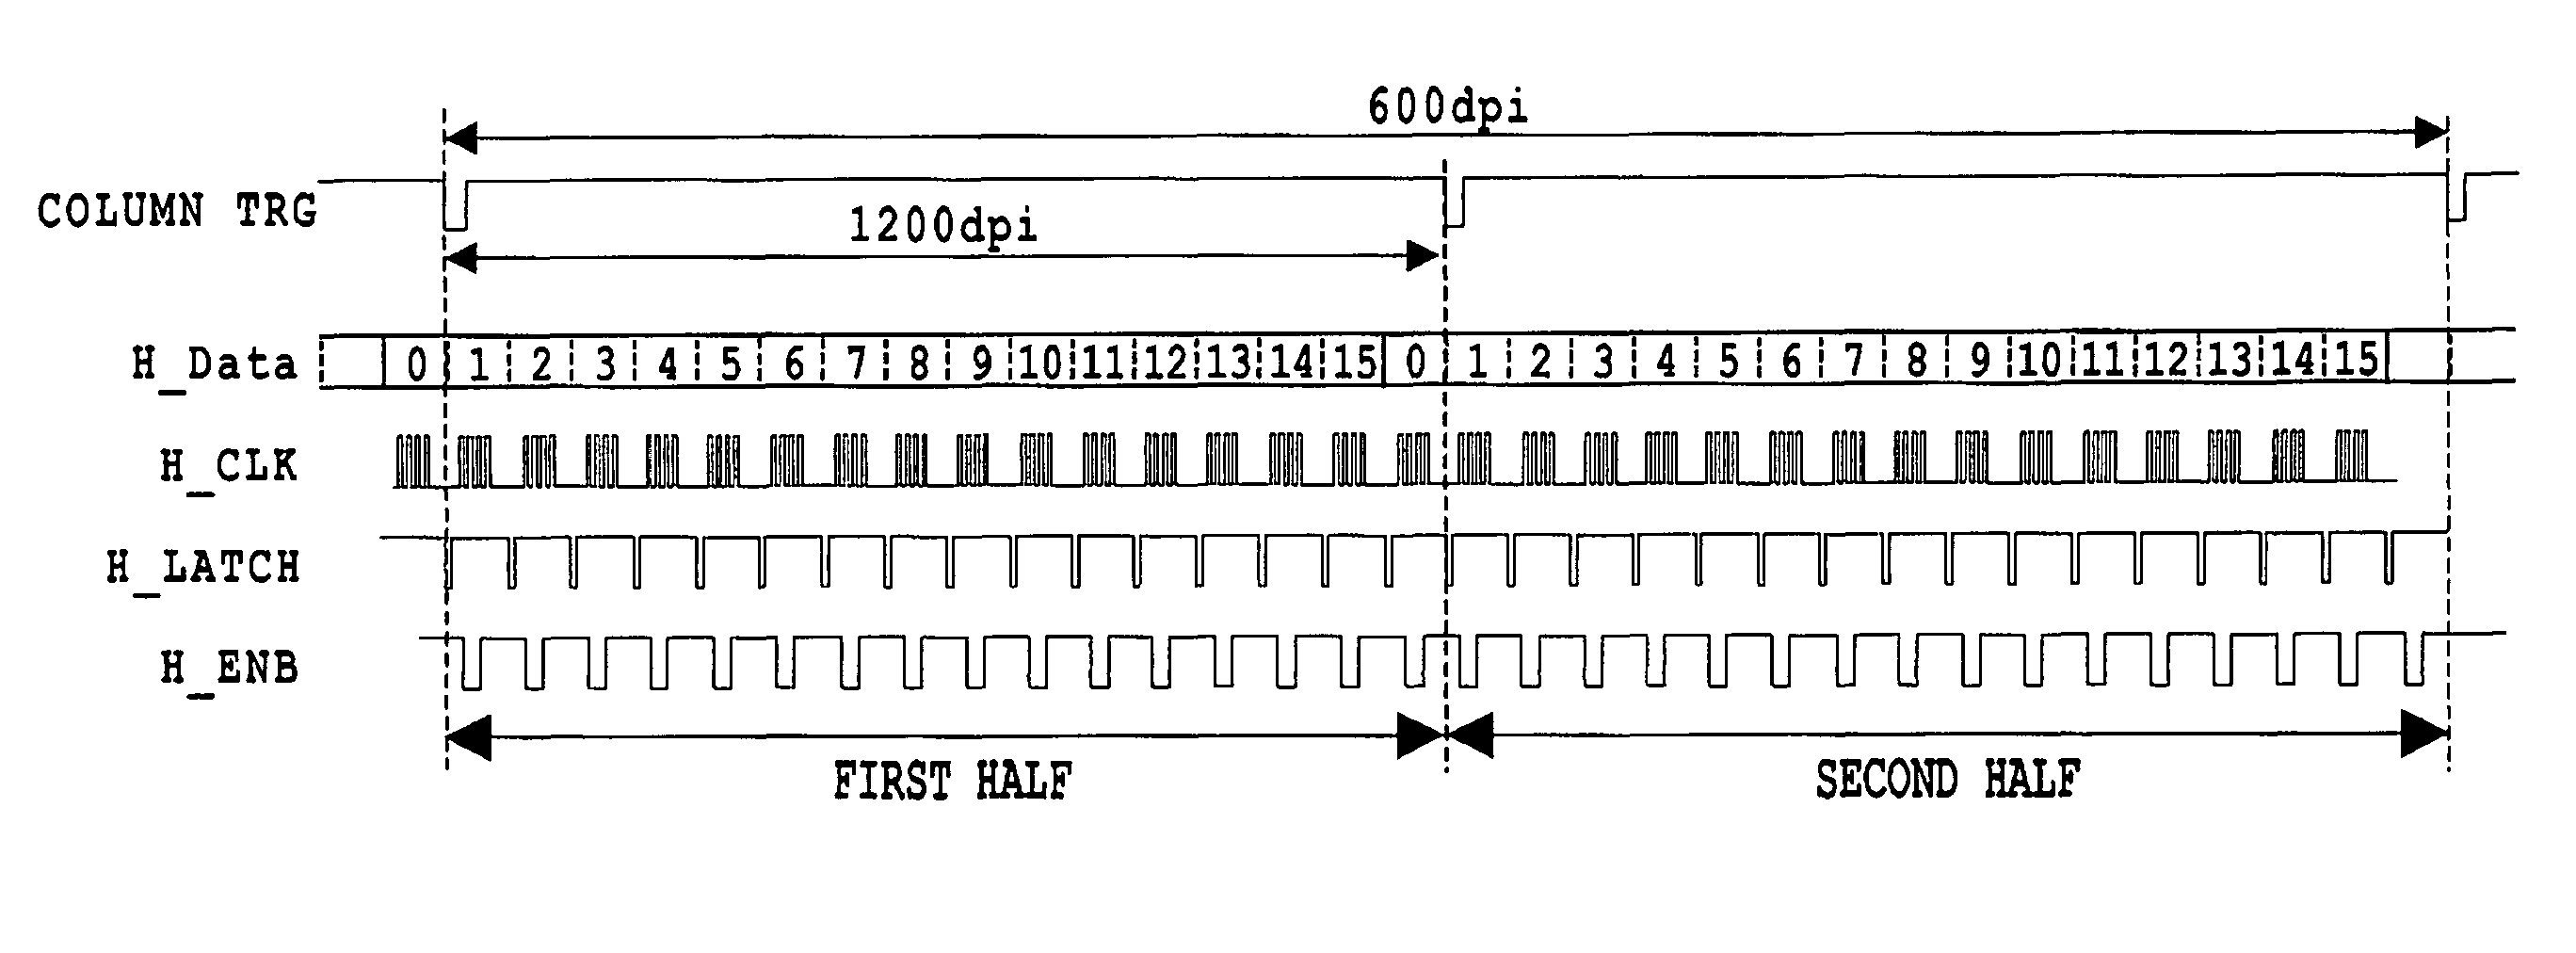 Printing apparatus and control method with adjustment unit correcting the displacement of the print position by pixel unit, and another unit correcting the displacement by the unit smaller than the pixel